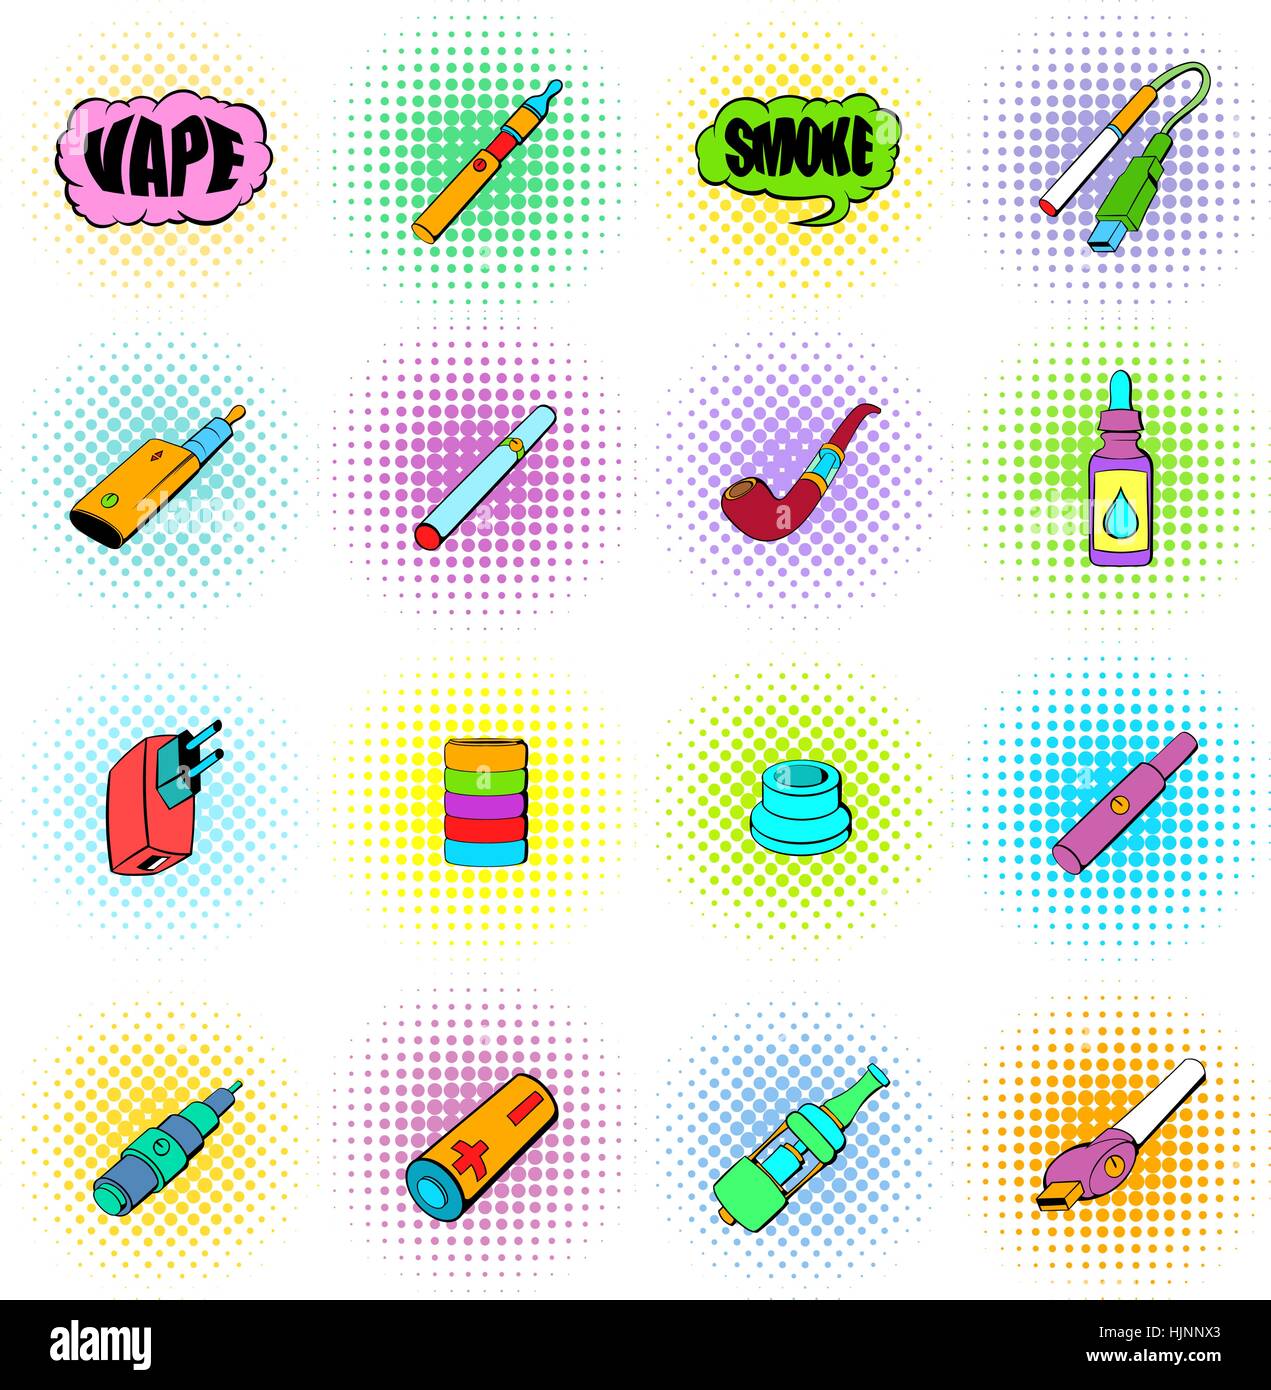 E-cigarettes icons set in comics style isolated on white Stock Vector